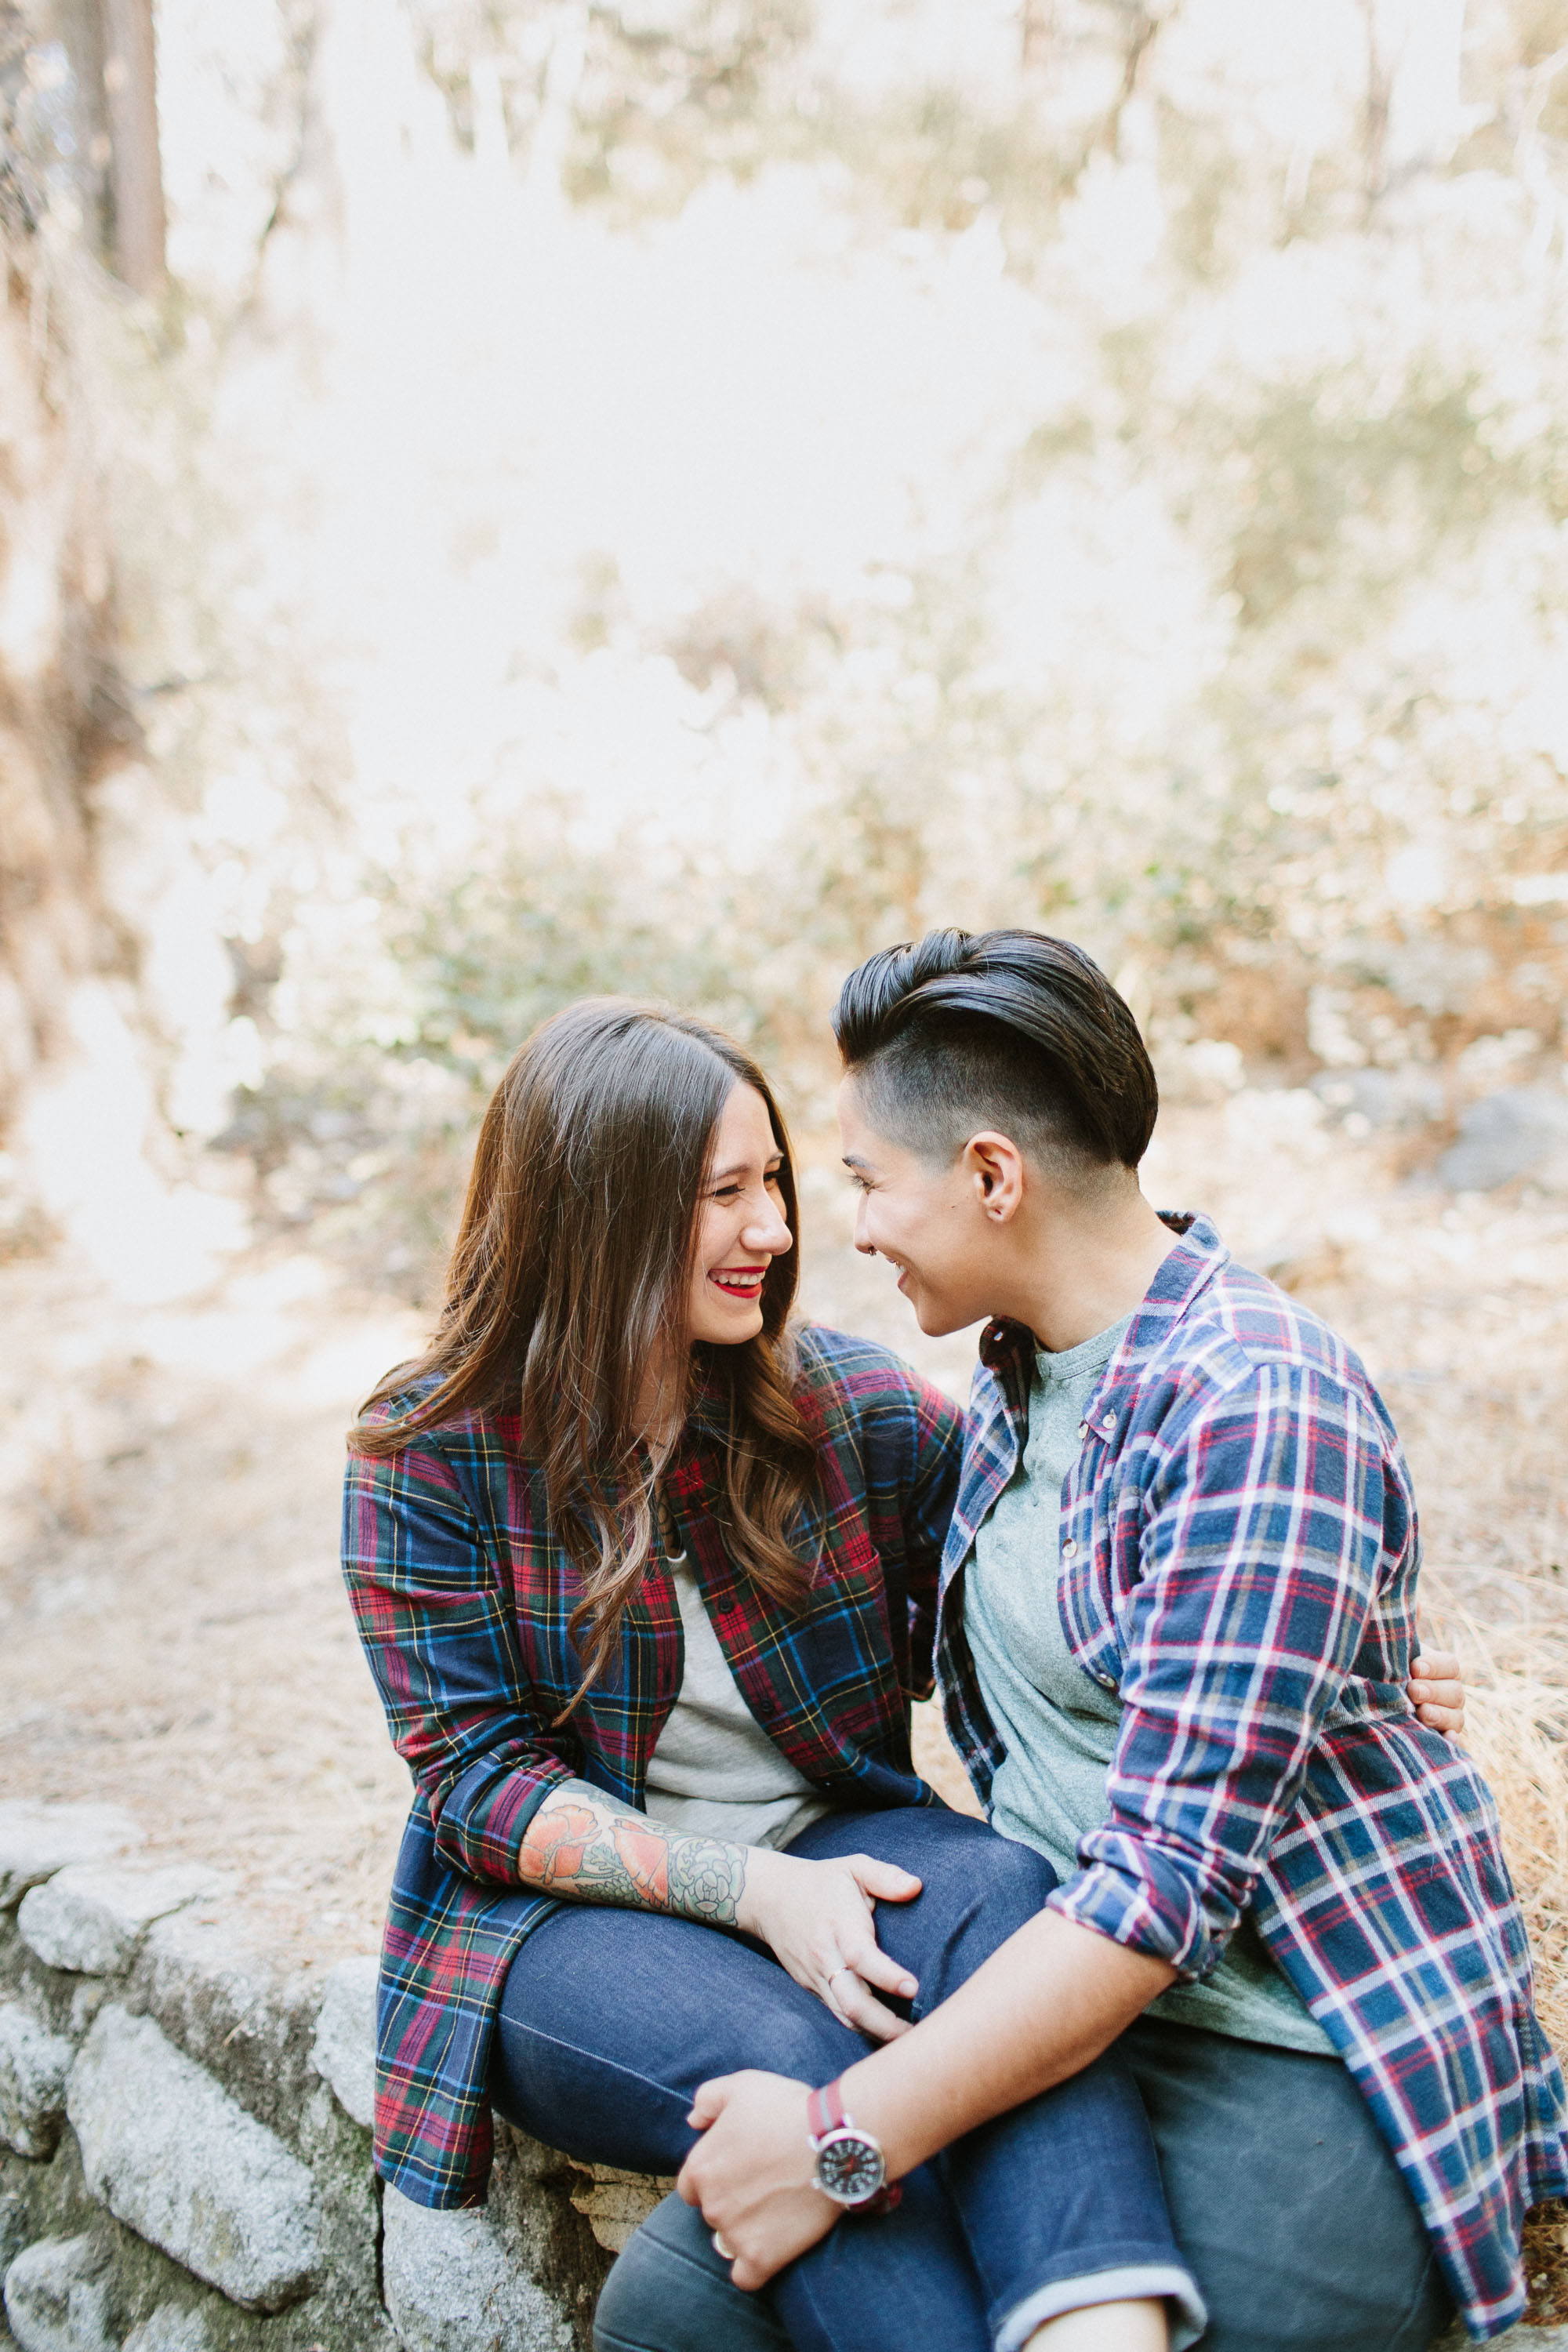 www-marycostaphotography-com-angeles-national-forest-engagement-0010